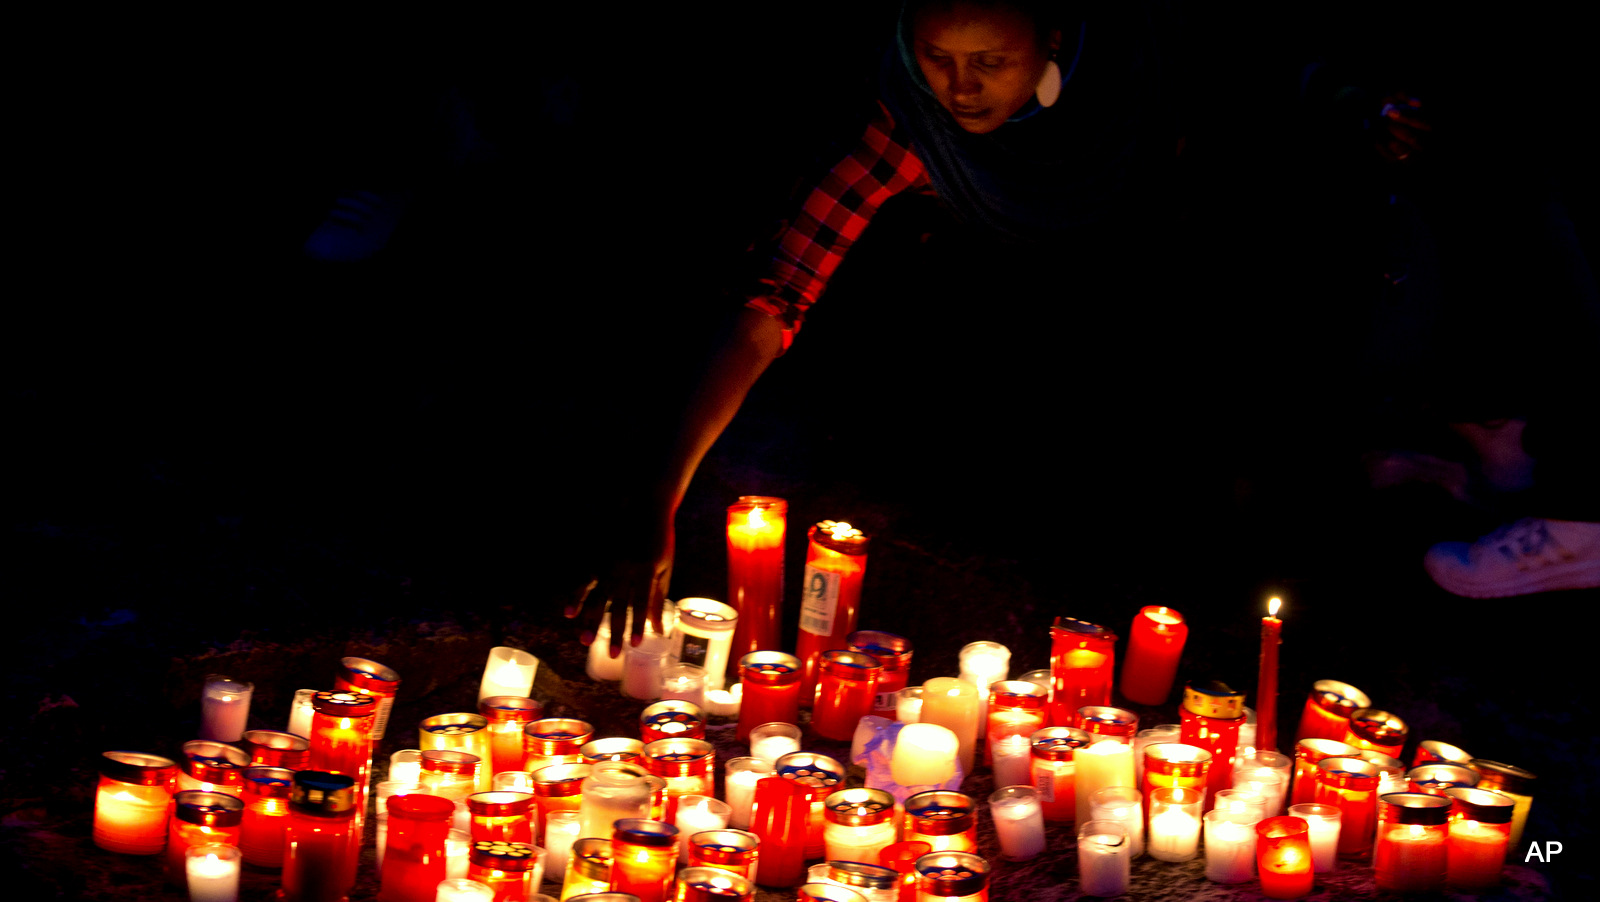 A woman lays a candle  by the sea during a candle light vigil in Sliema, in the outskirts of Valletta, Malta, Wednesday, April 22, 2015. A smuggler's boat crammed with hundreds of people overturned off the coast of Libya on Saturday as rescuers approached, causing what could be the Mediterranean's deadliest known migrant tragedy. The burial ceremony of the 24 rescued bodies will take place in Malta Thursday. 